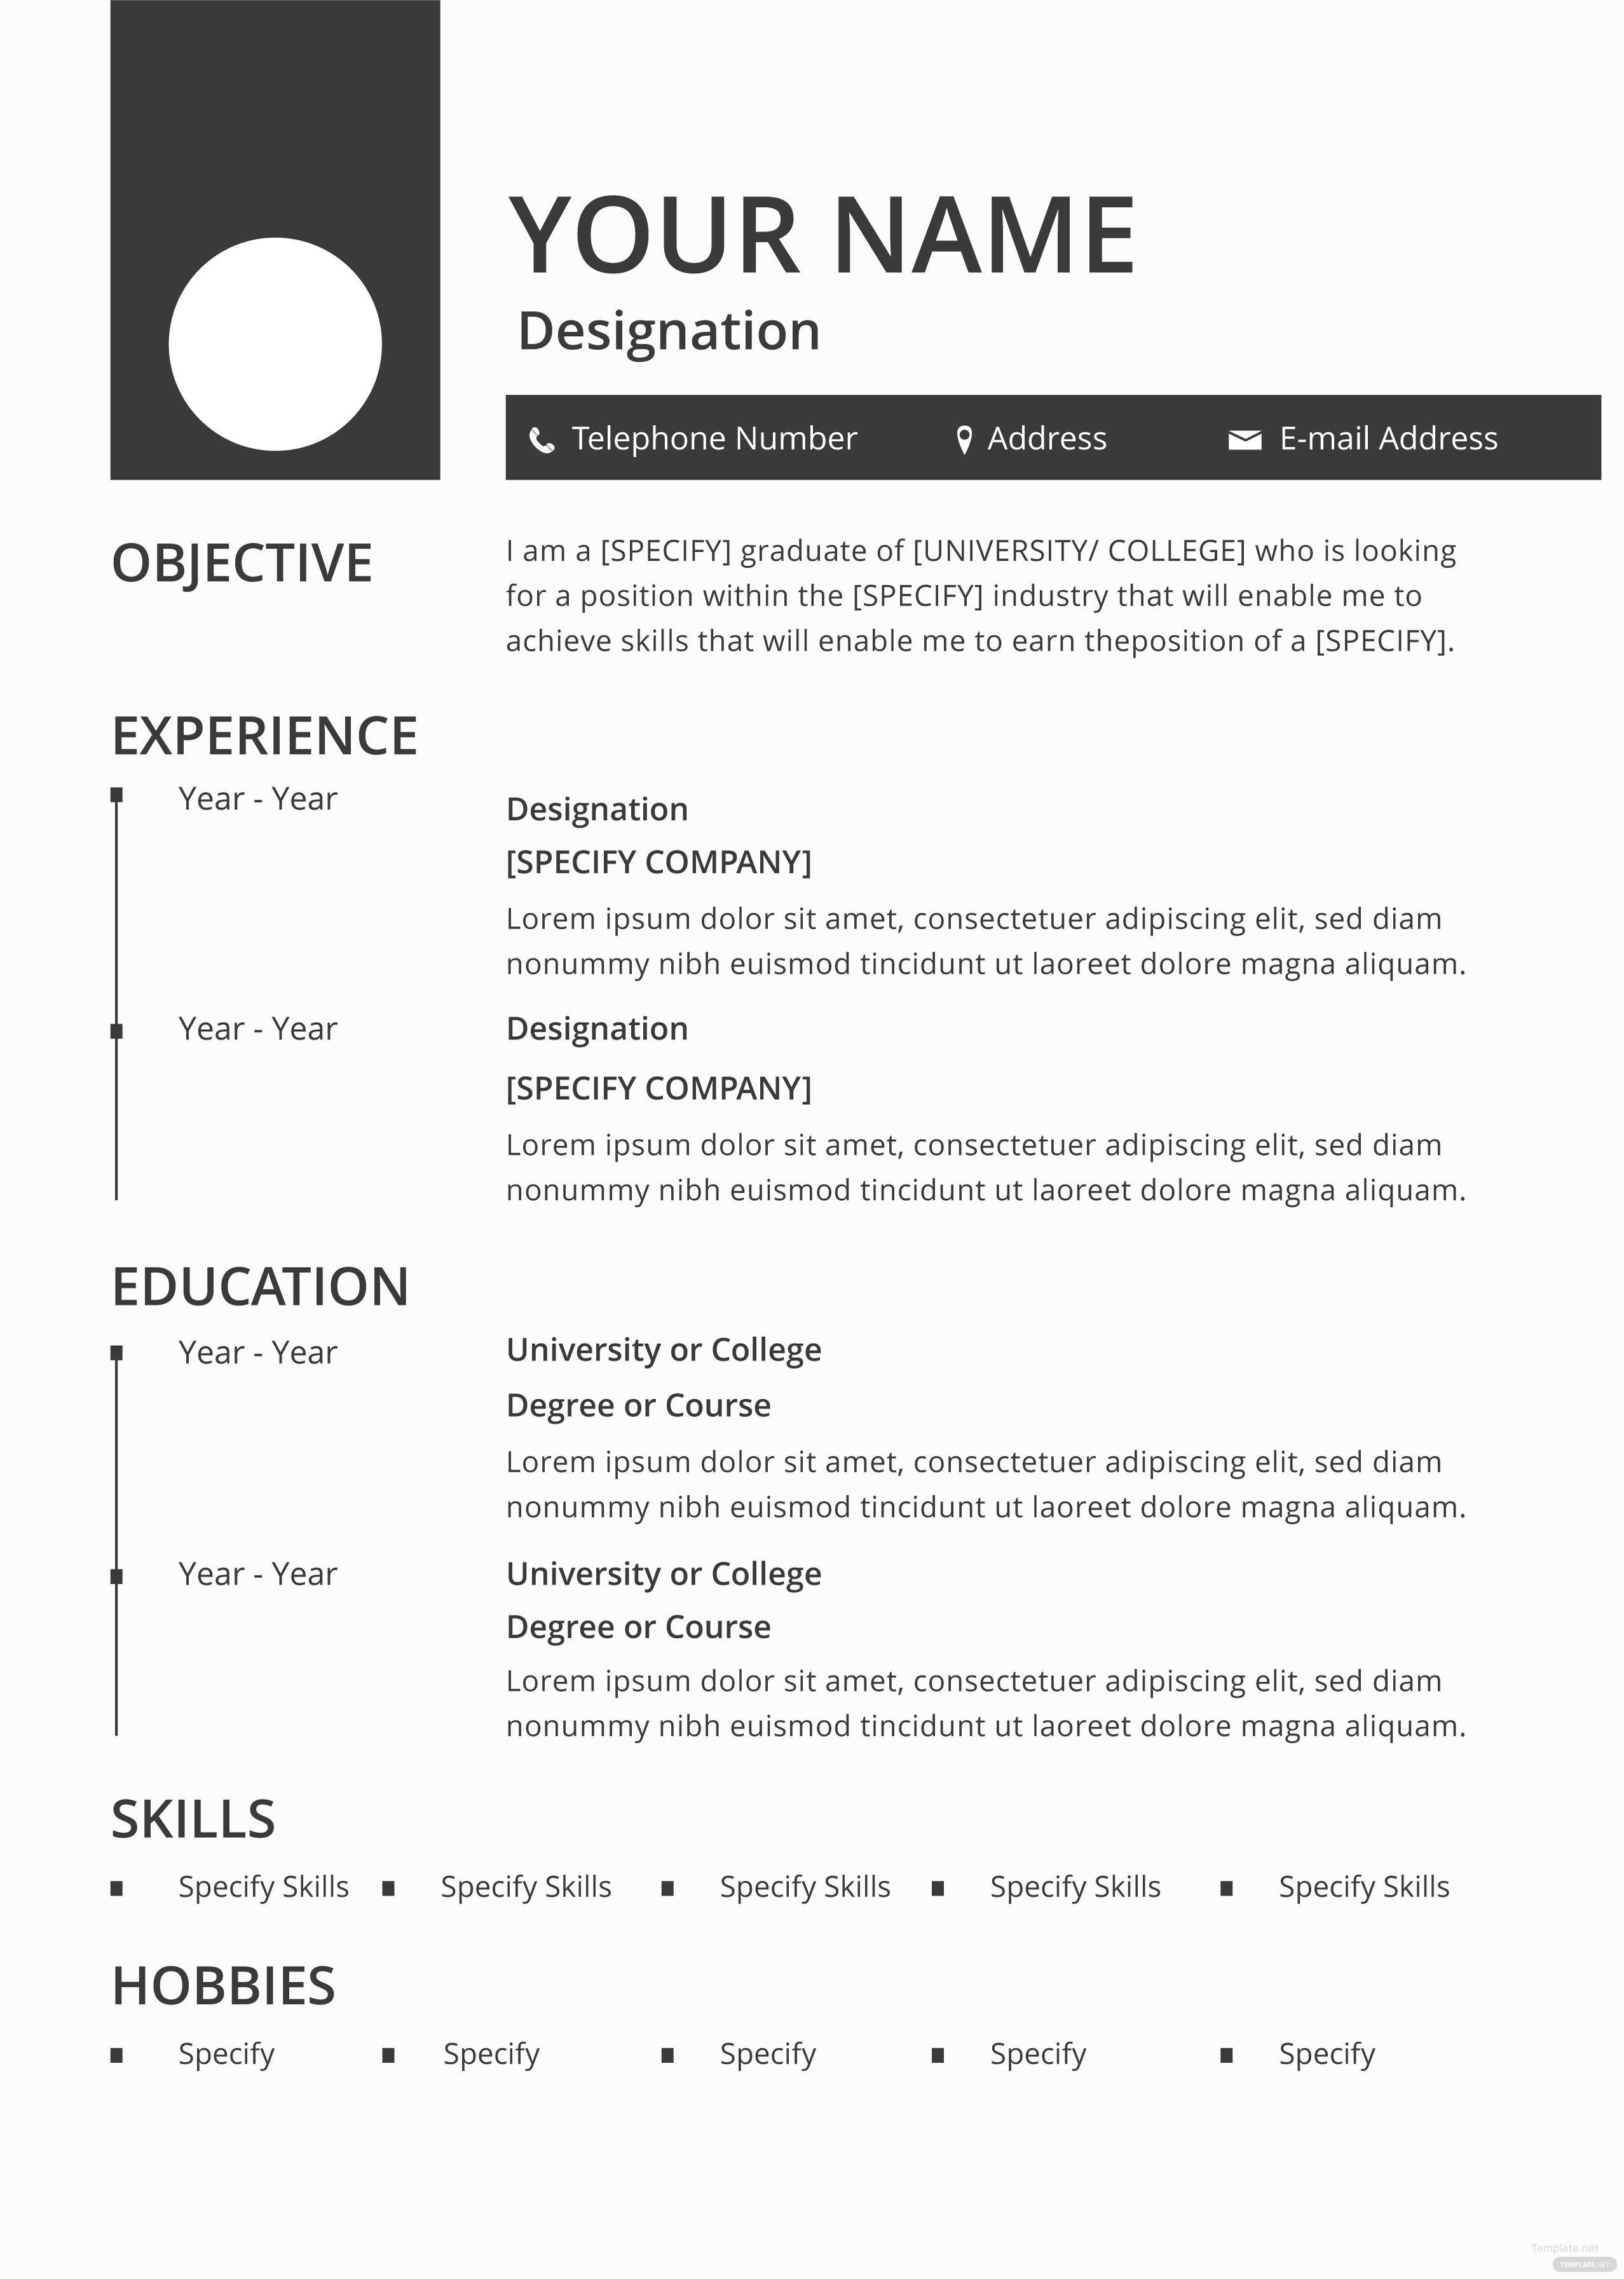 Free Sample Resume Templates Free Blank Resume and Cv Template In Adobe Shop